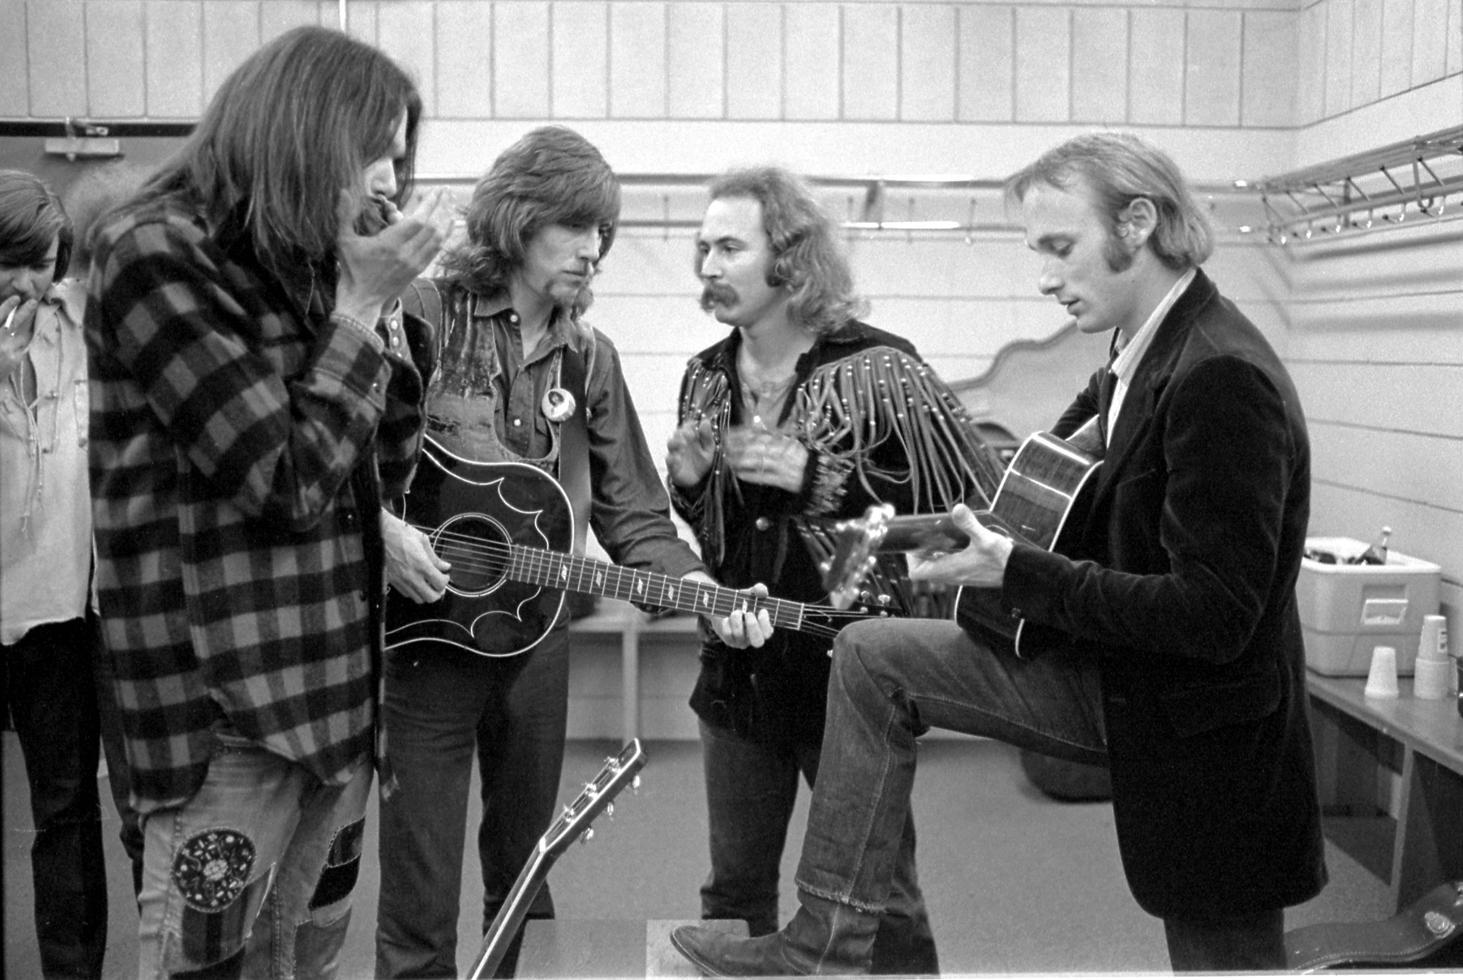 Henry Diltz Black and White Photograph - Crosby, Stills, Nash, & Young, 1970